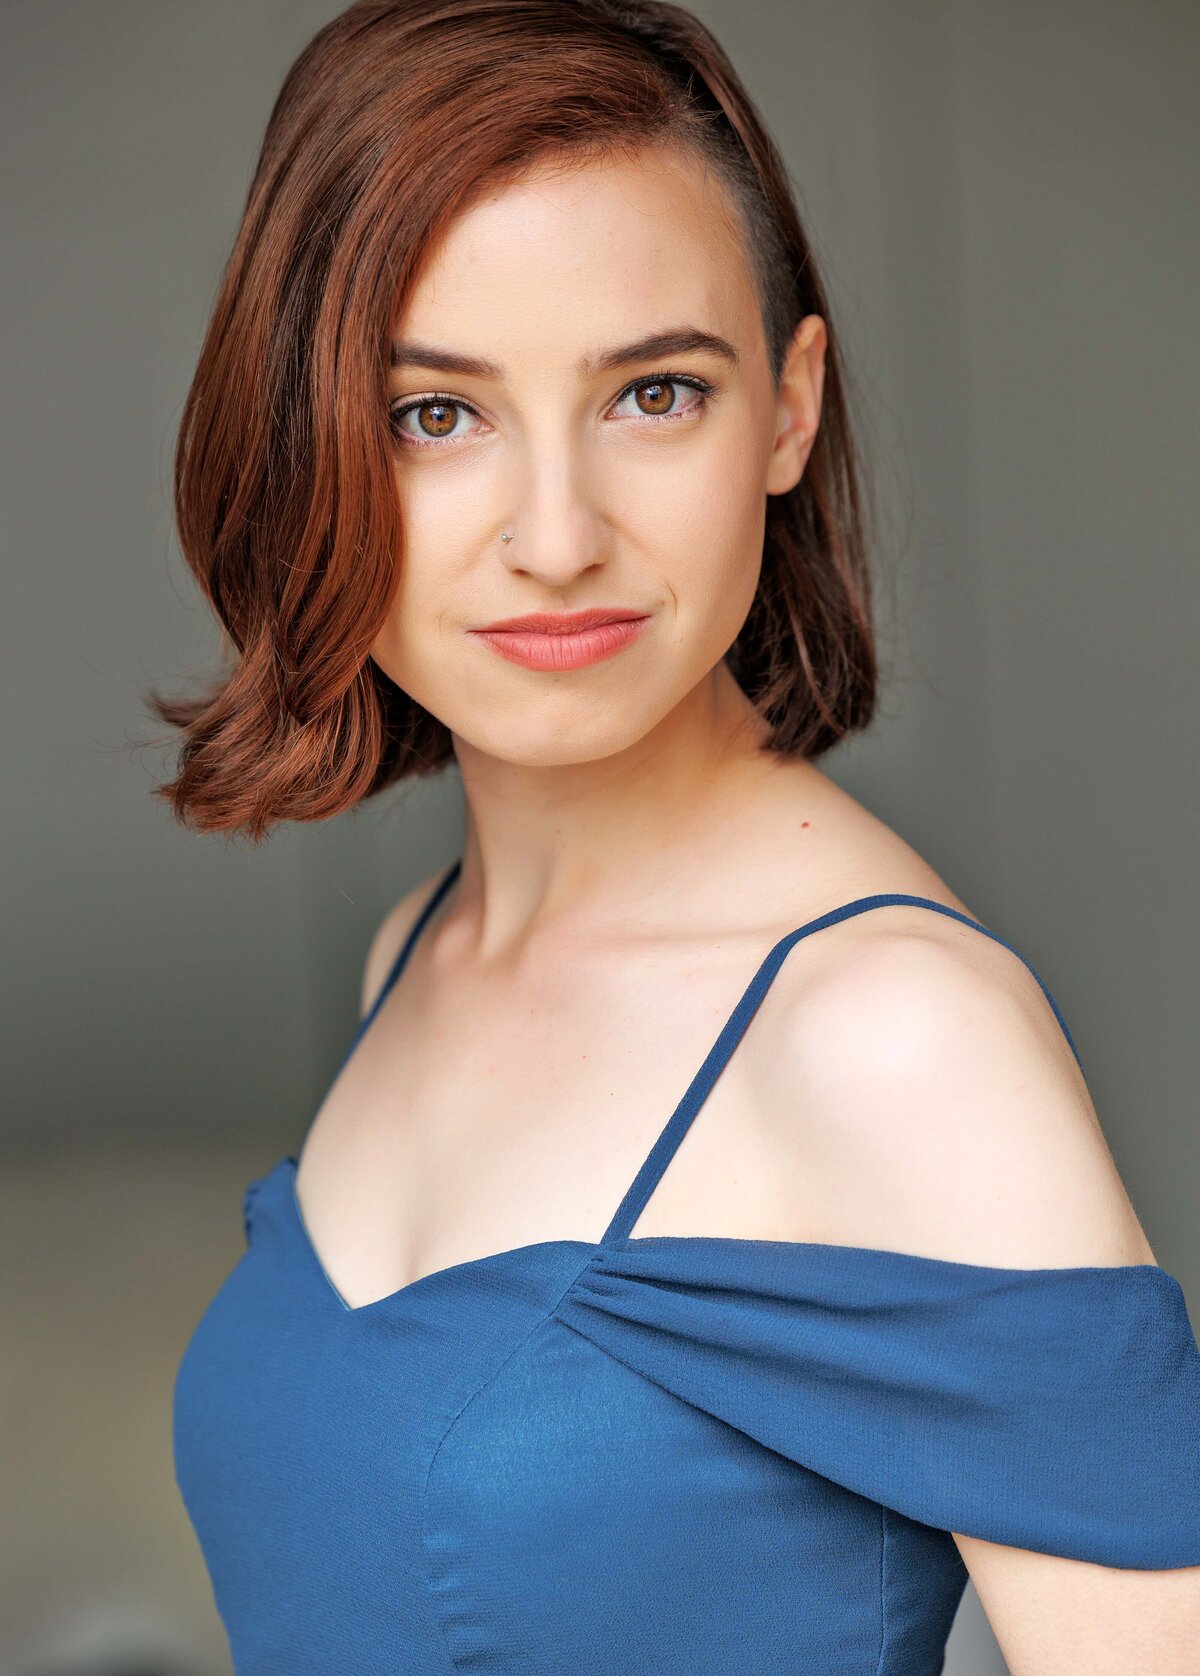 A girl in a blue green dress during an actor headshot session in the Bay Area